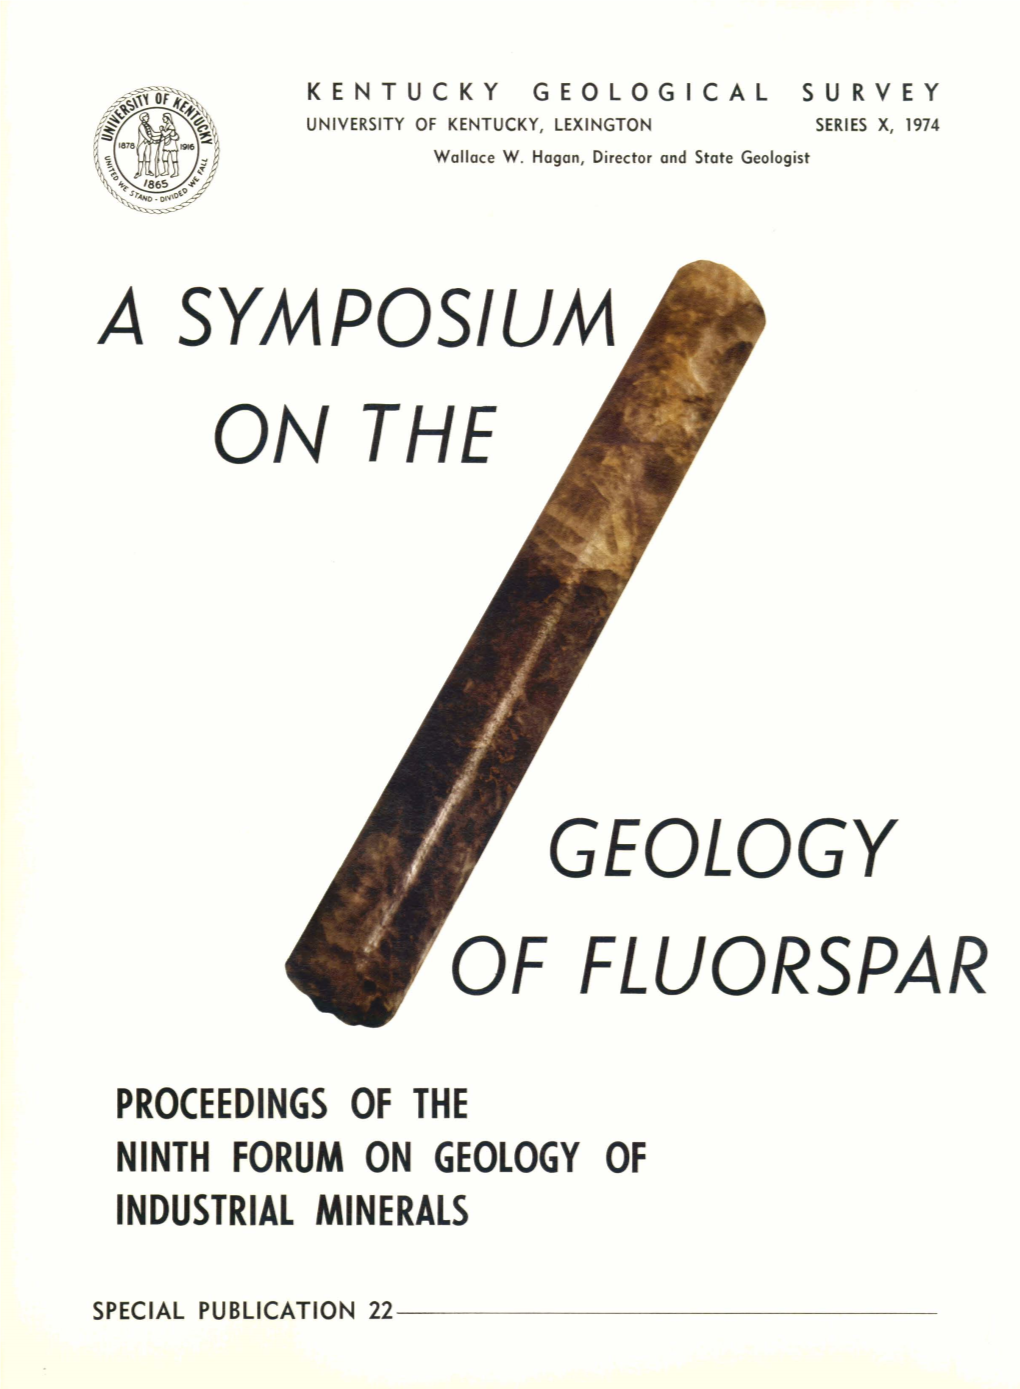 A Symposium on the Geology of Fluorspar